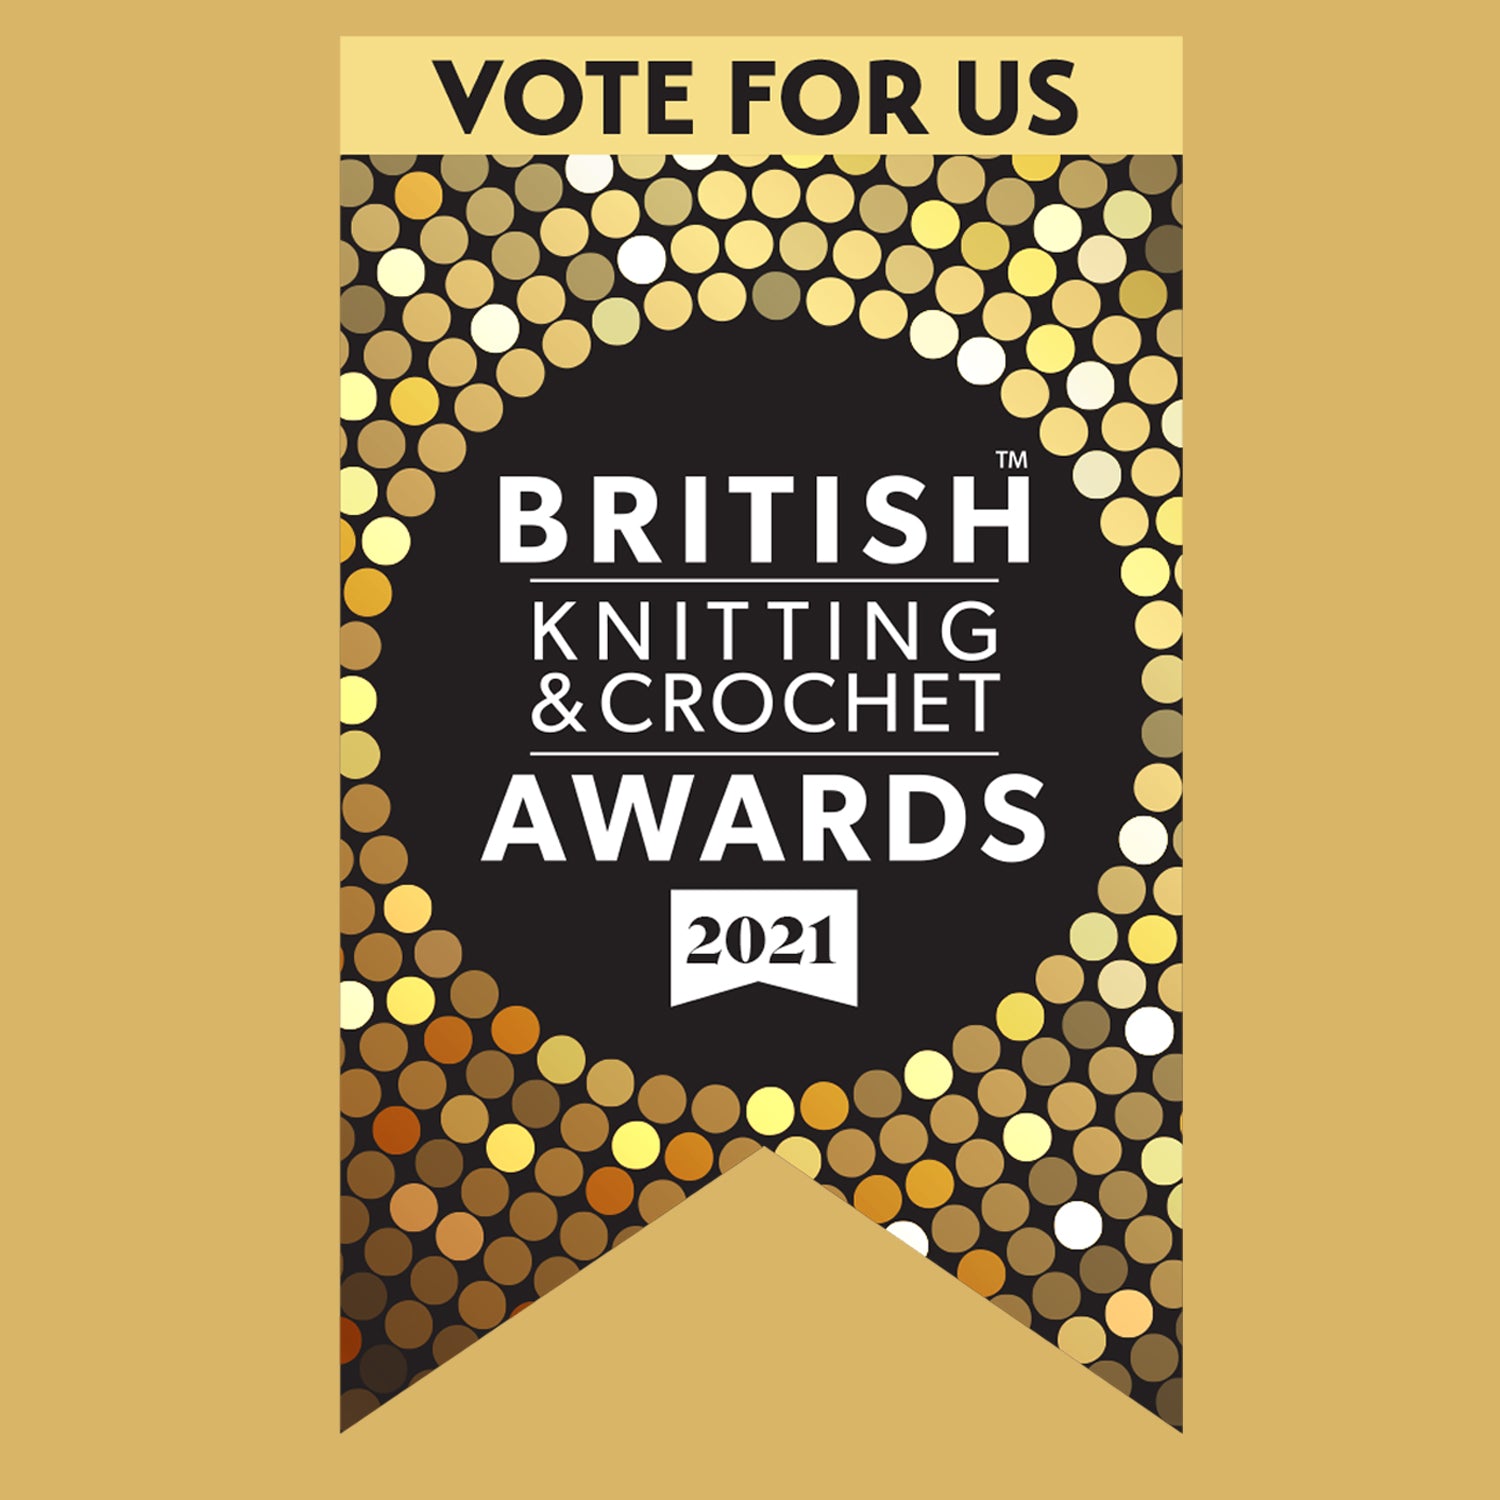 Voting is open! - Let's Knit British Knitting & Crochet Awards 2021